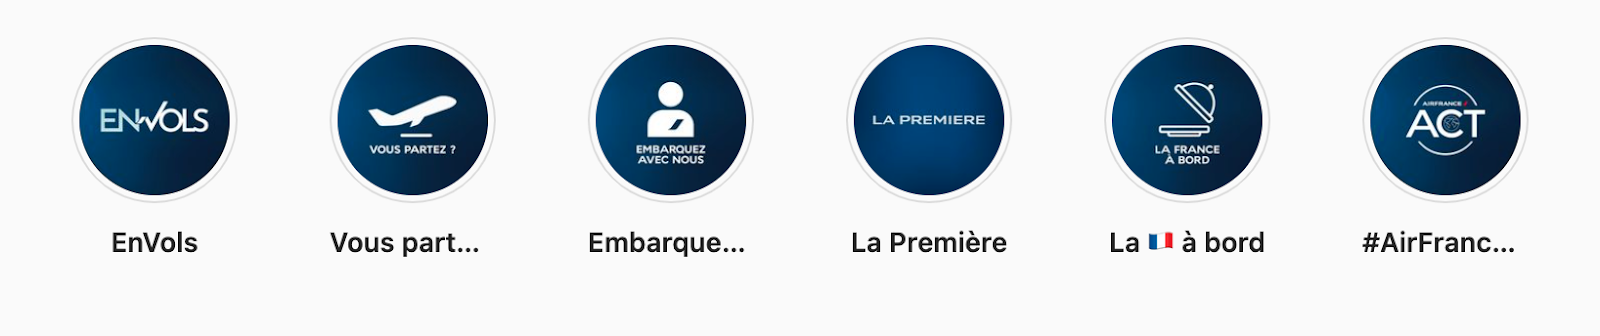 Exemple highlight Instagram Air France